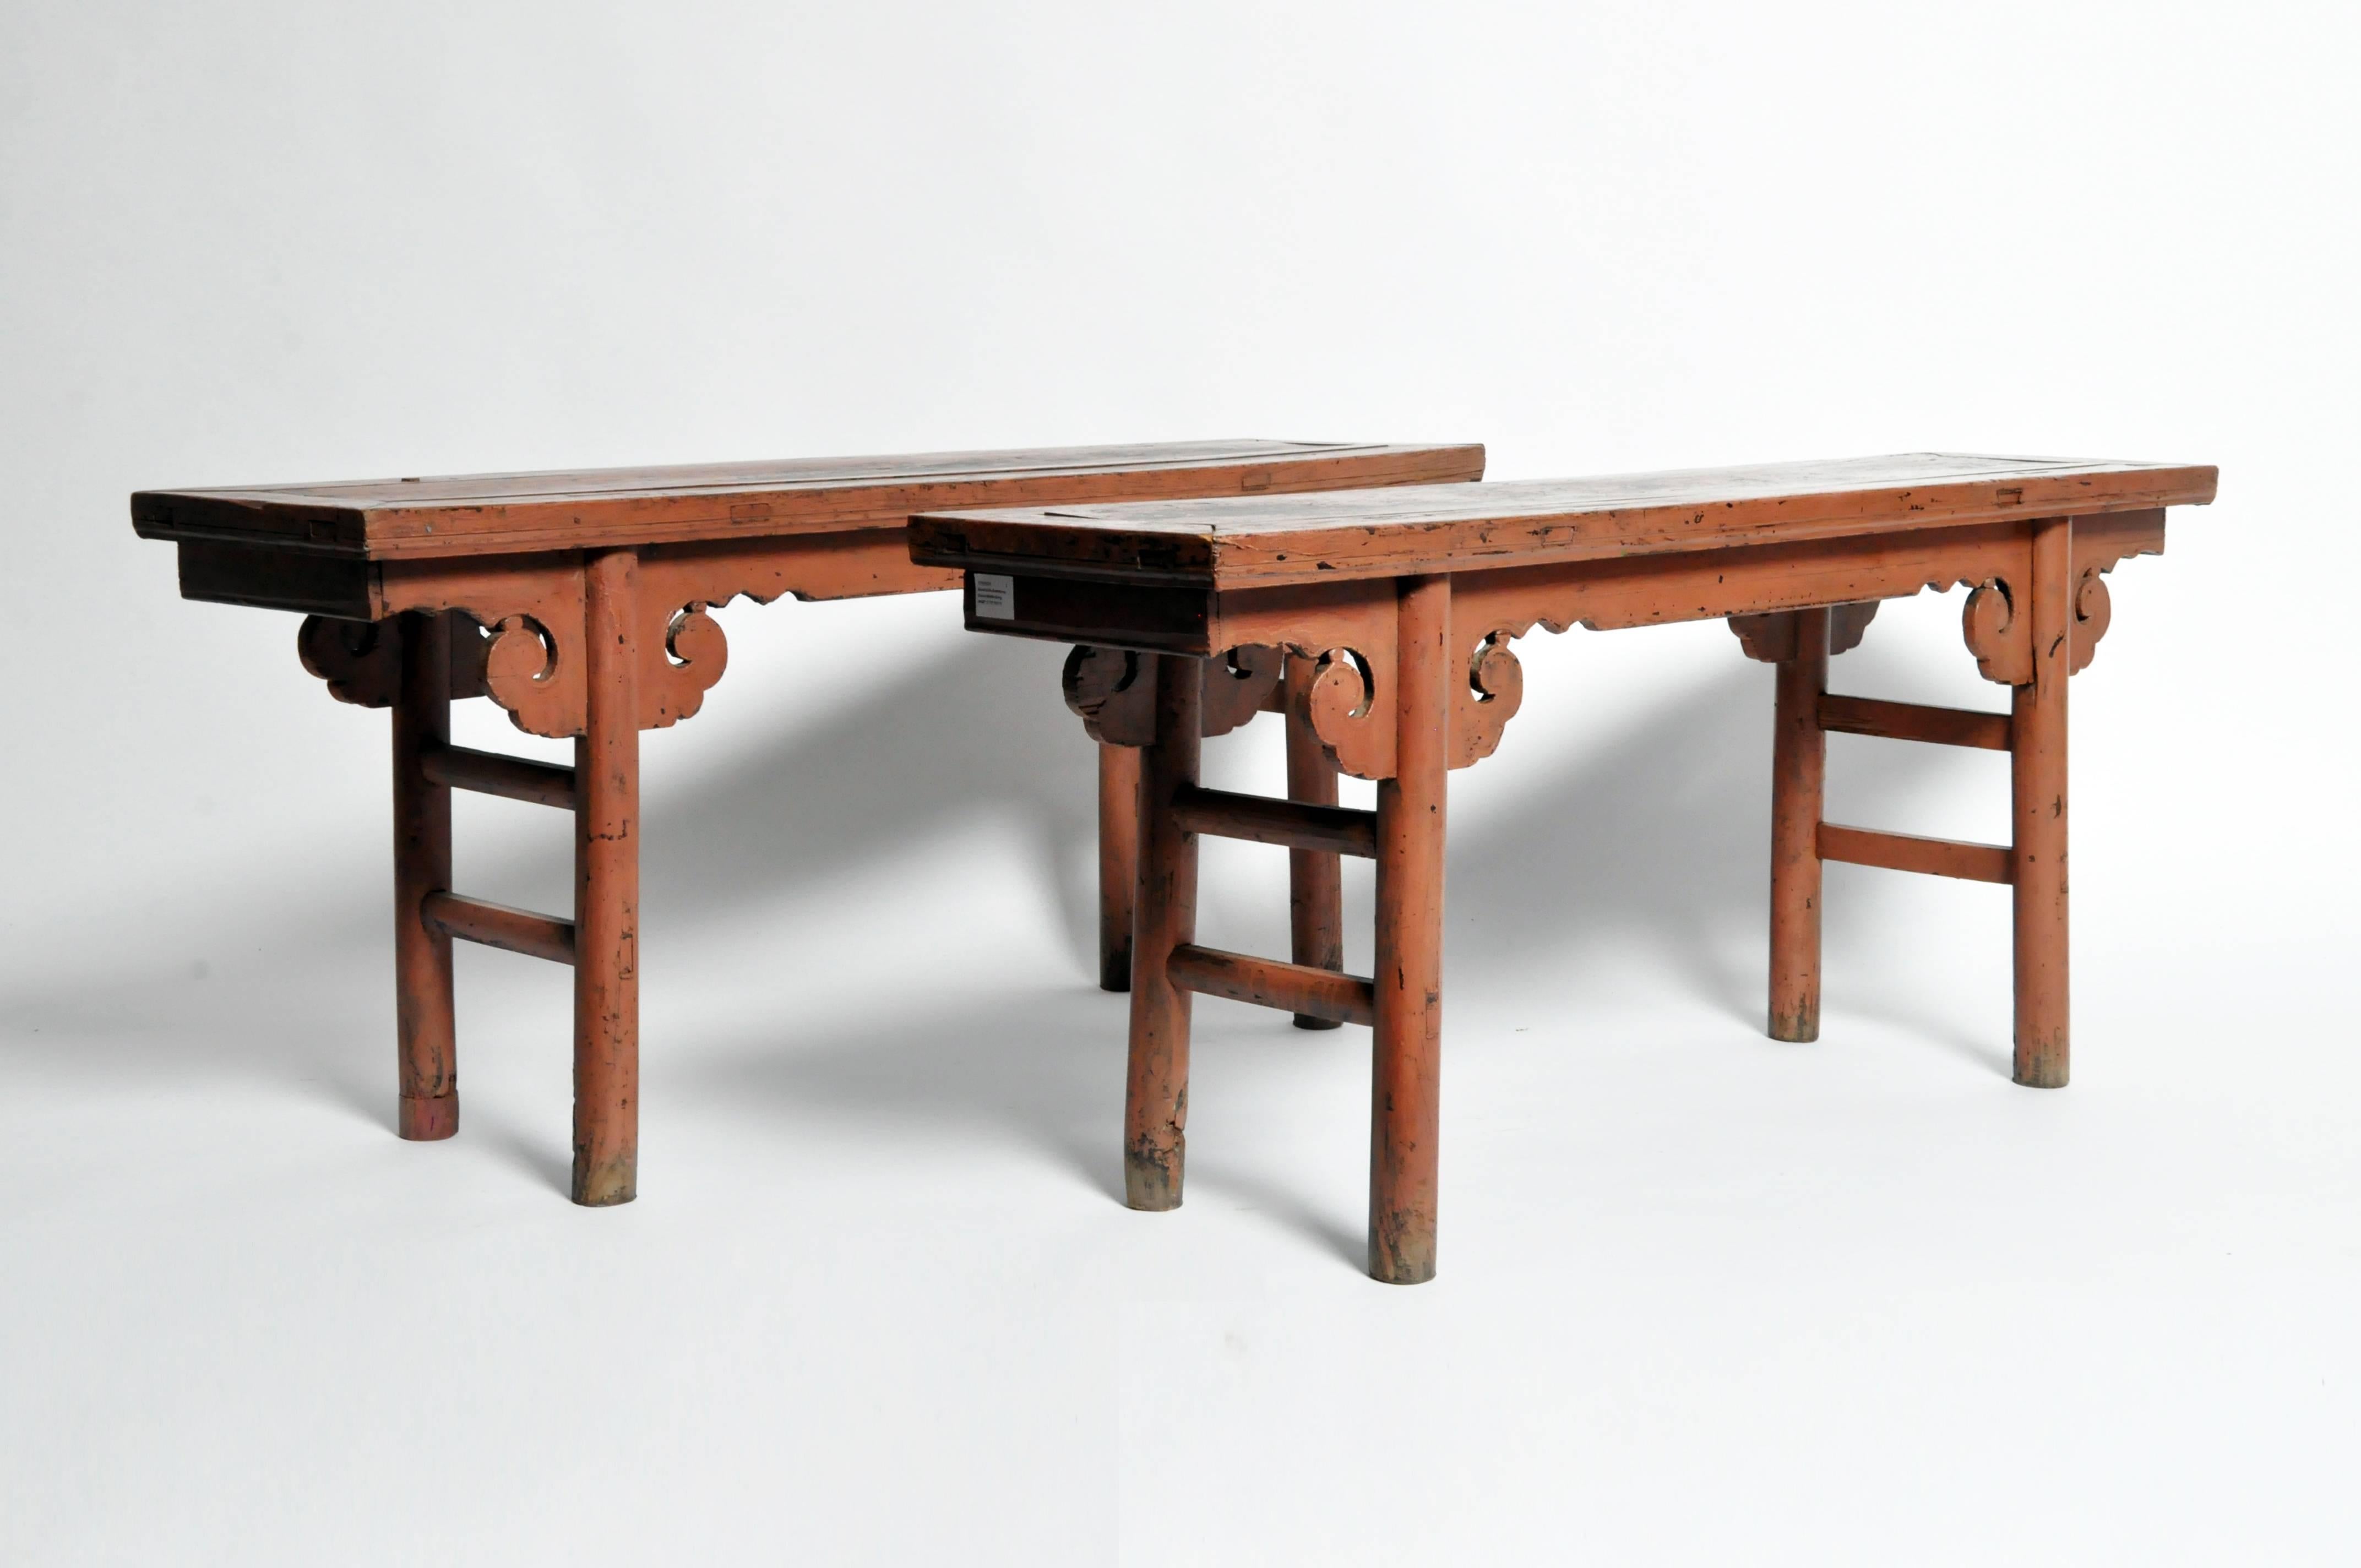 The cloud motif apron-head spandrels and round legs of this Chinese elmwood bench give this piece a delicate, sophisticated look. Dating back to middle Qing dynasty of Shandong, China, this piece has original oxblood lacquer.